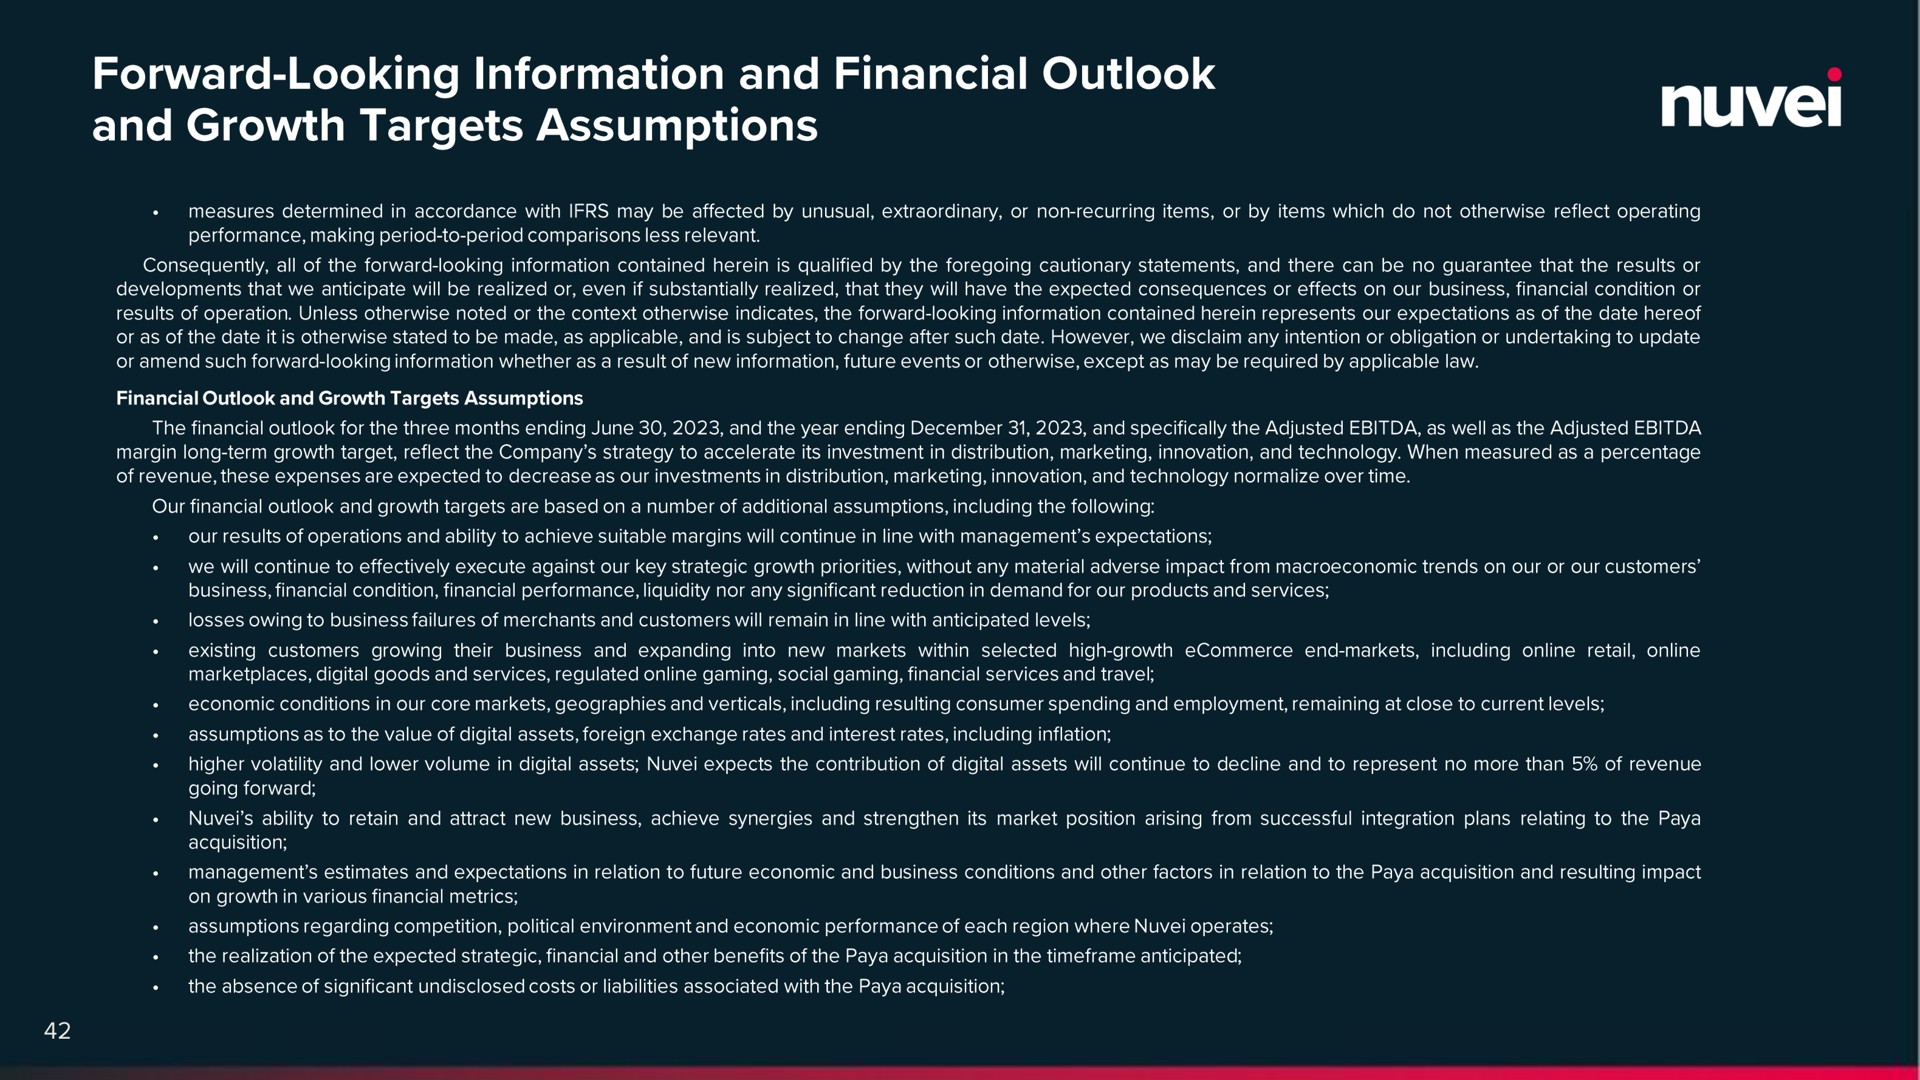 forward looking information and financial outlook and growth targets assumptions | Nuvei